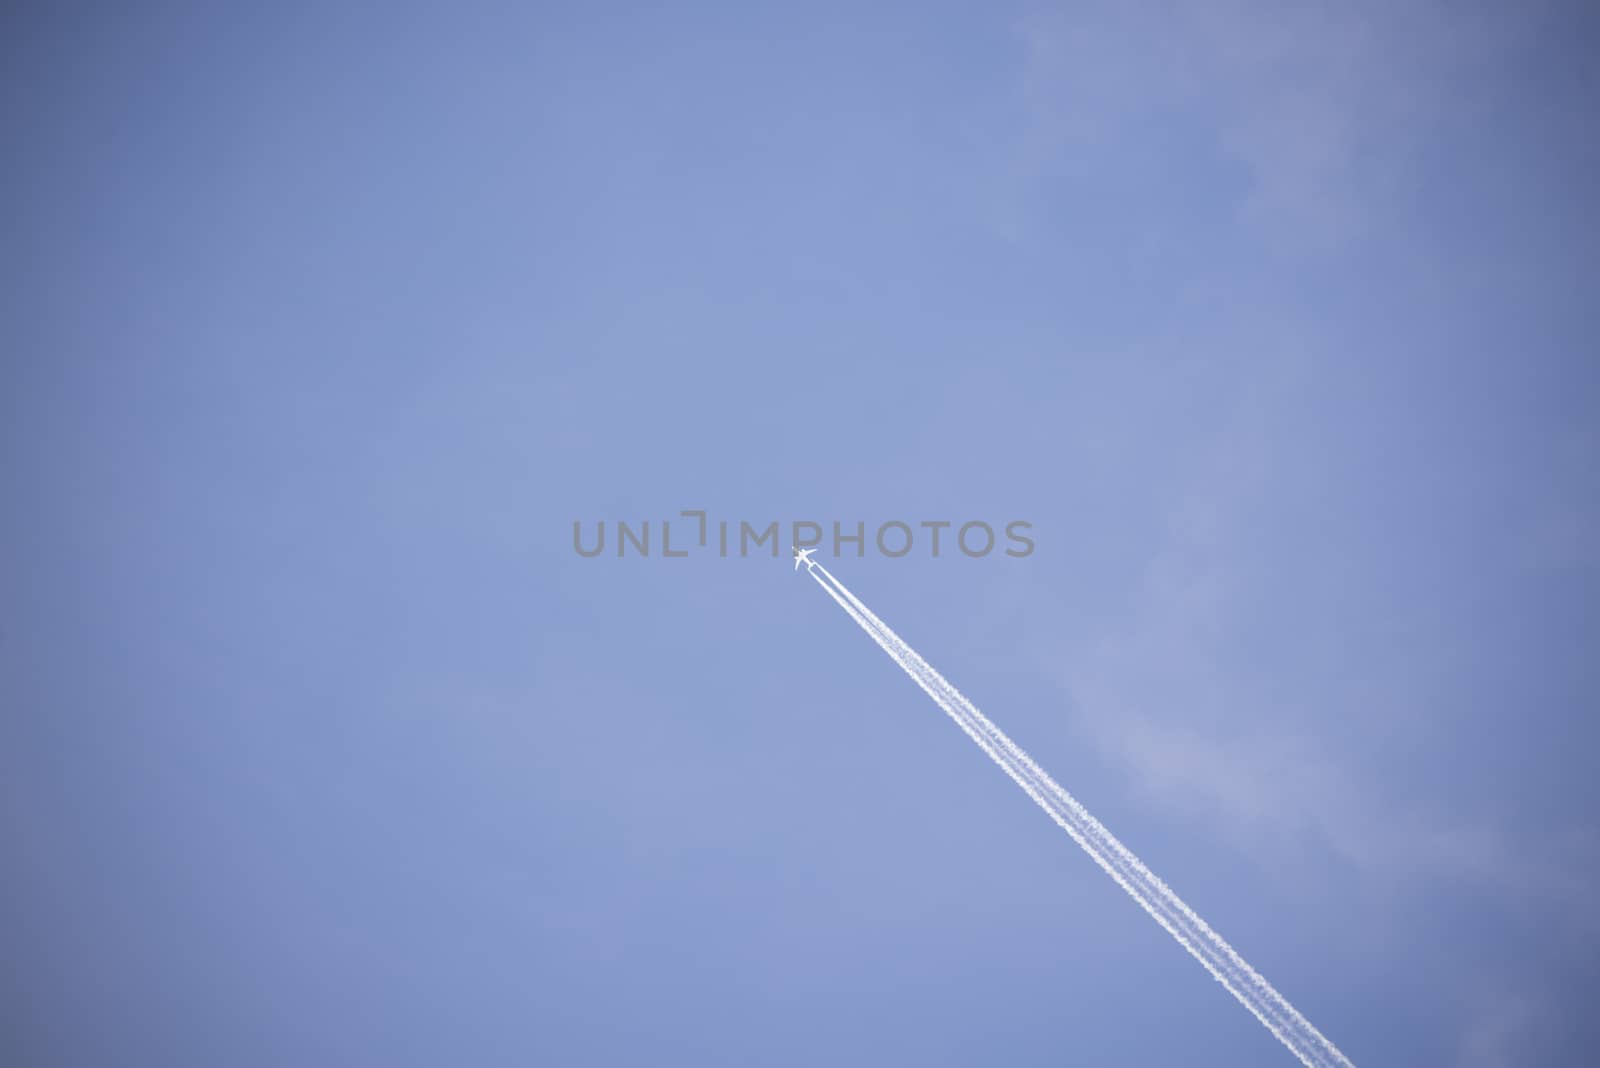 jet and its vapour trails in a cloudy blue sky